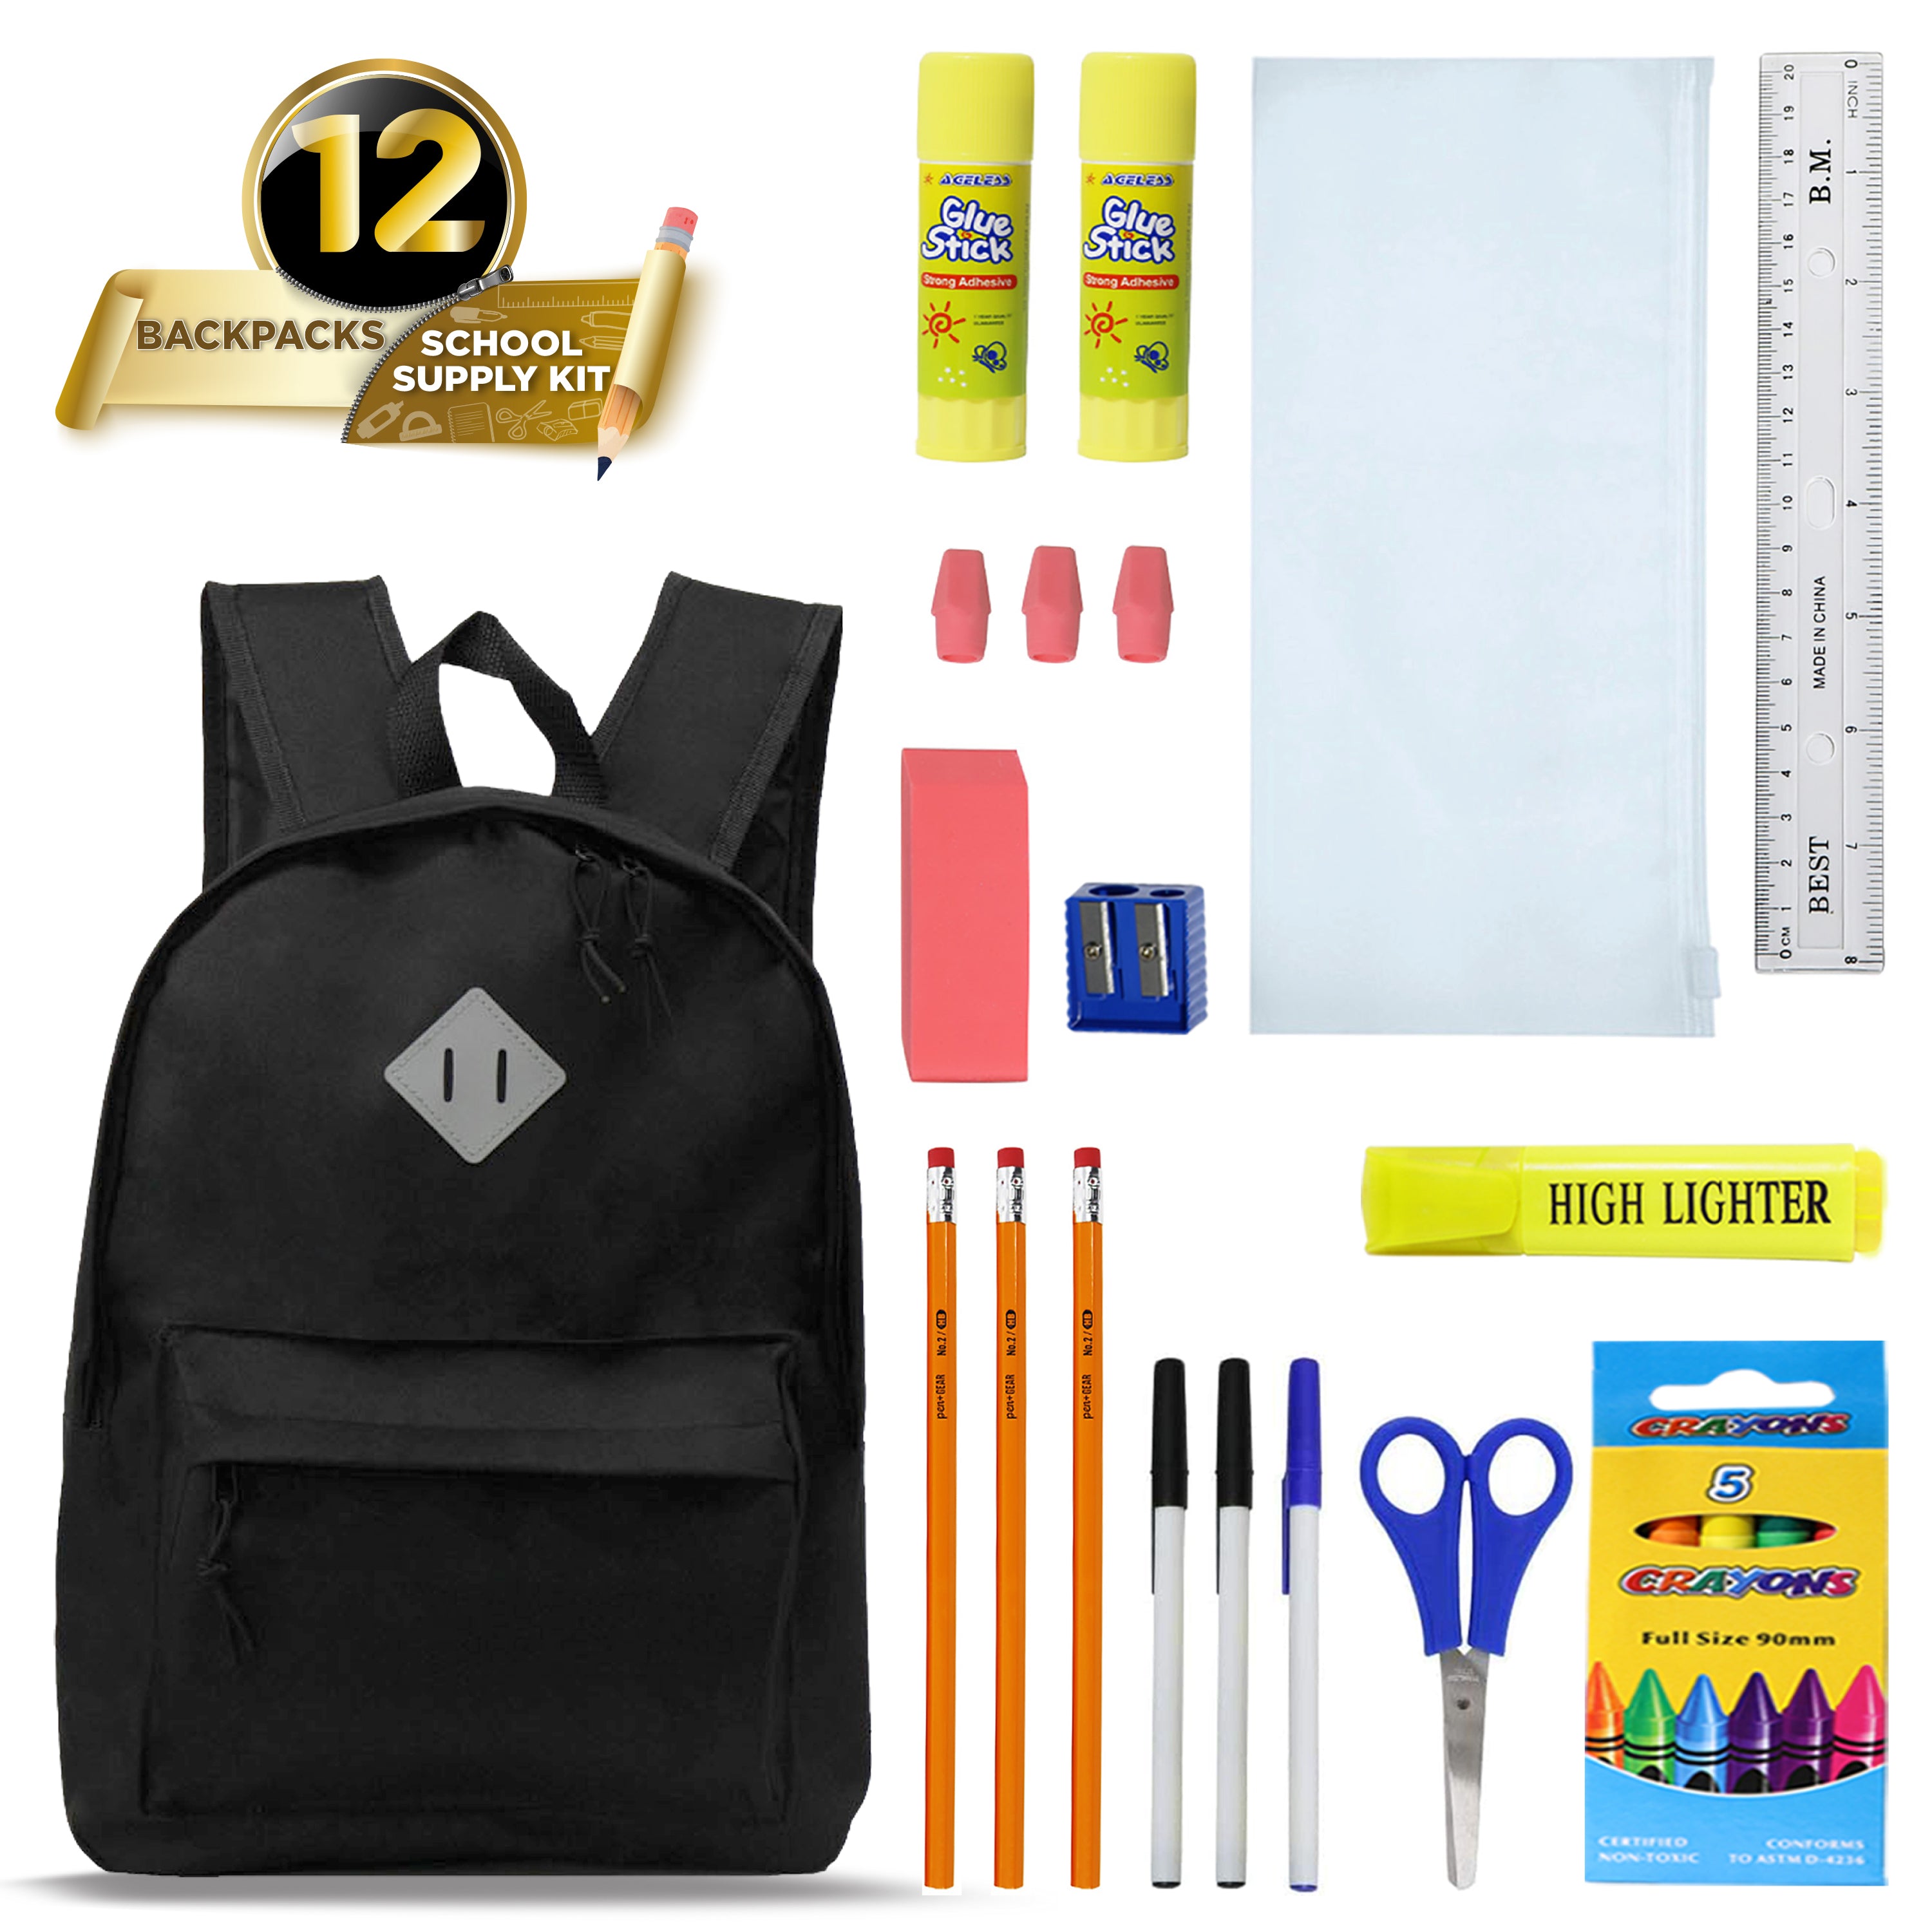 17 Inch Bulk Backpacks in Black with School Supply Kits Wholesale - Case of 12